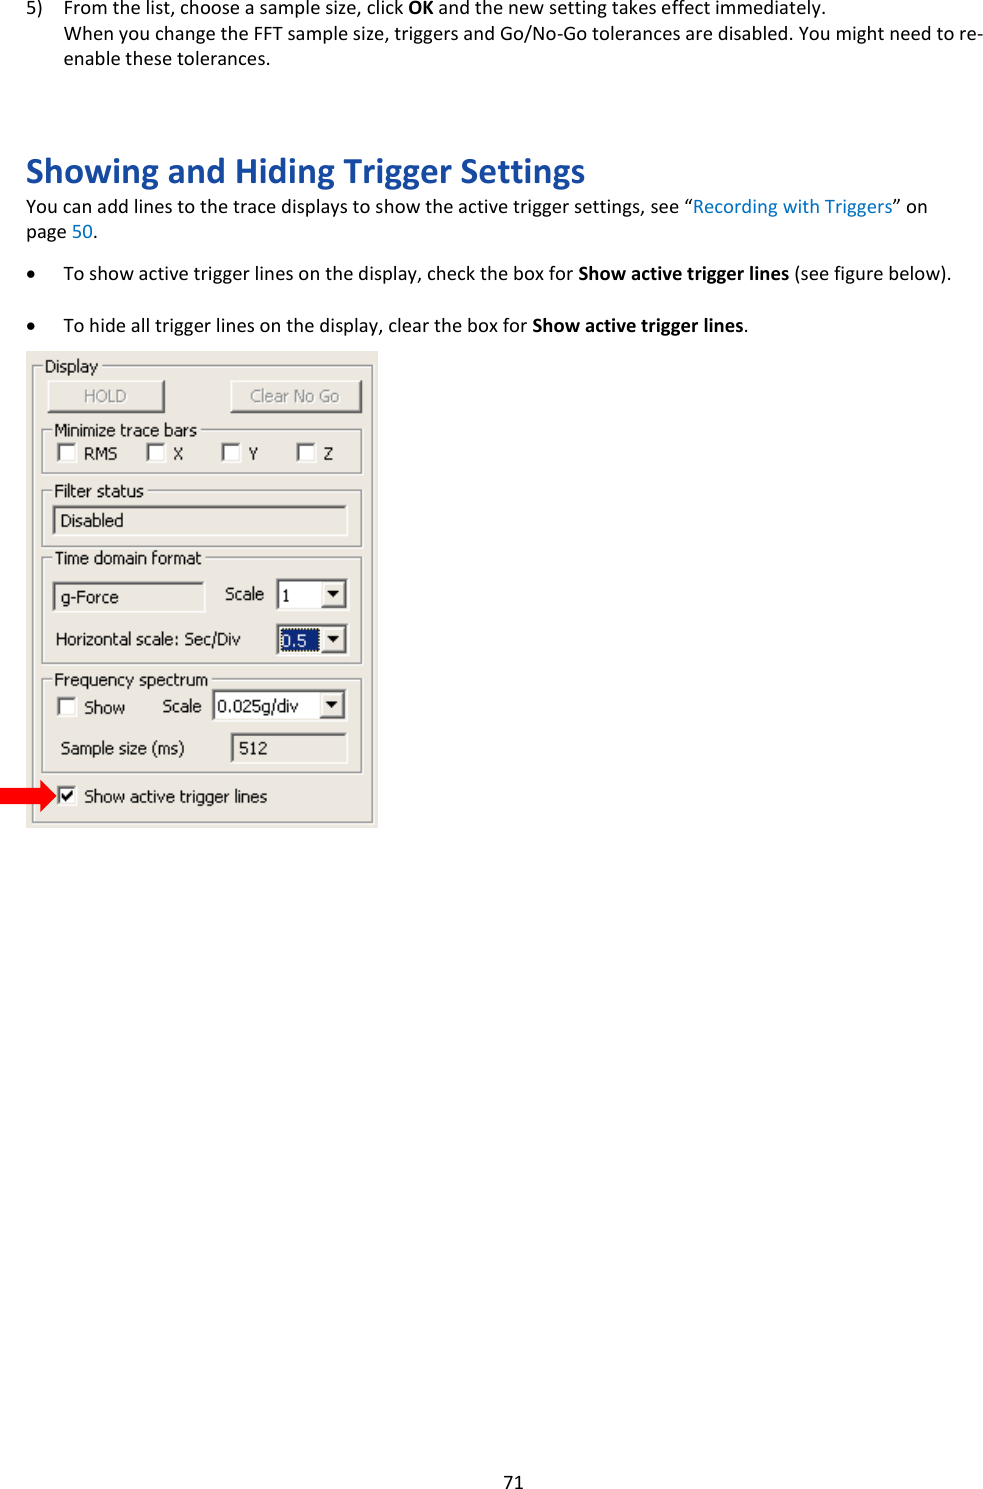   71 5) From the list, choose a sample size, click OK and the new setting takes effect immediately. When you change the FFT sample size, triggers and Go/No-Go tolerances are disabled. You might need to re-enable these tolerances.    Showing and Hiding Trigger Settings You can add lines to the trace displays to show the active trigger settings, see “Recording with Triggers” on page 50.  • To show active trigger lines on the display, check the box for Show active trigger lines (see figure below).  • To hide all trigger lines on the display, clear the box for Show active trigger lines.                                            